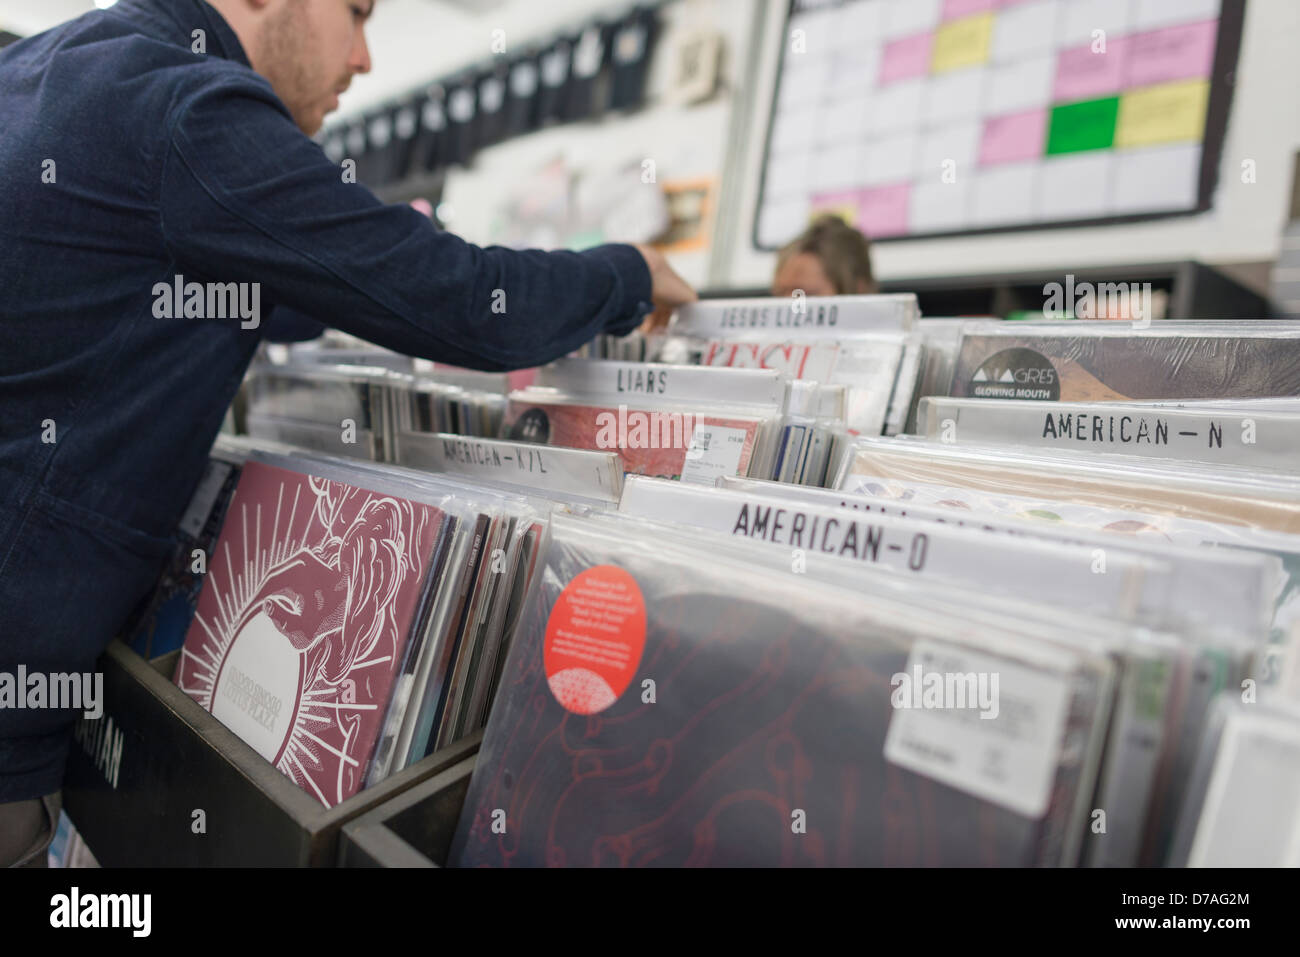 Customer browsing the vinyl LP section in music store Stock Photo